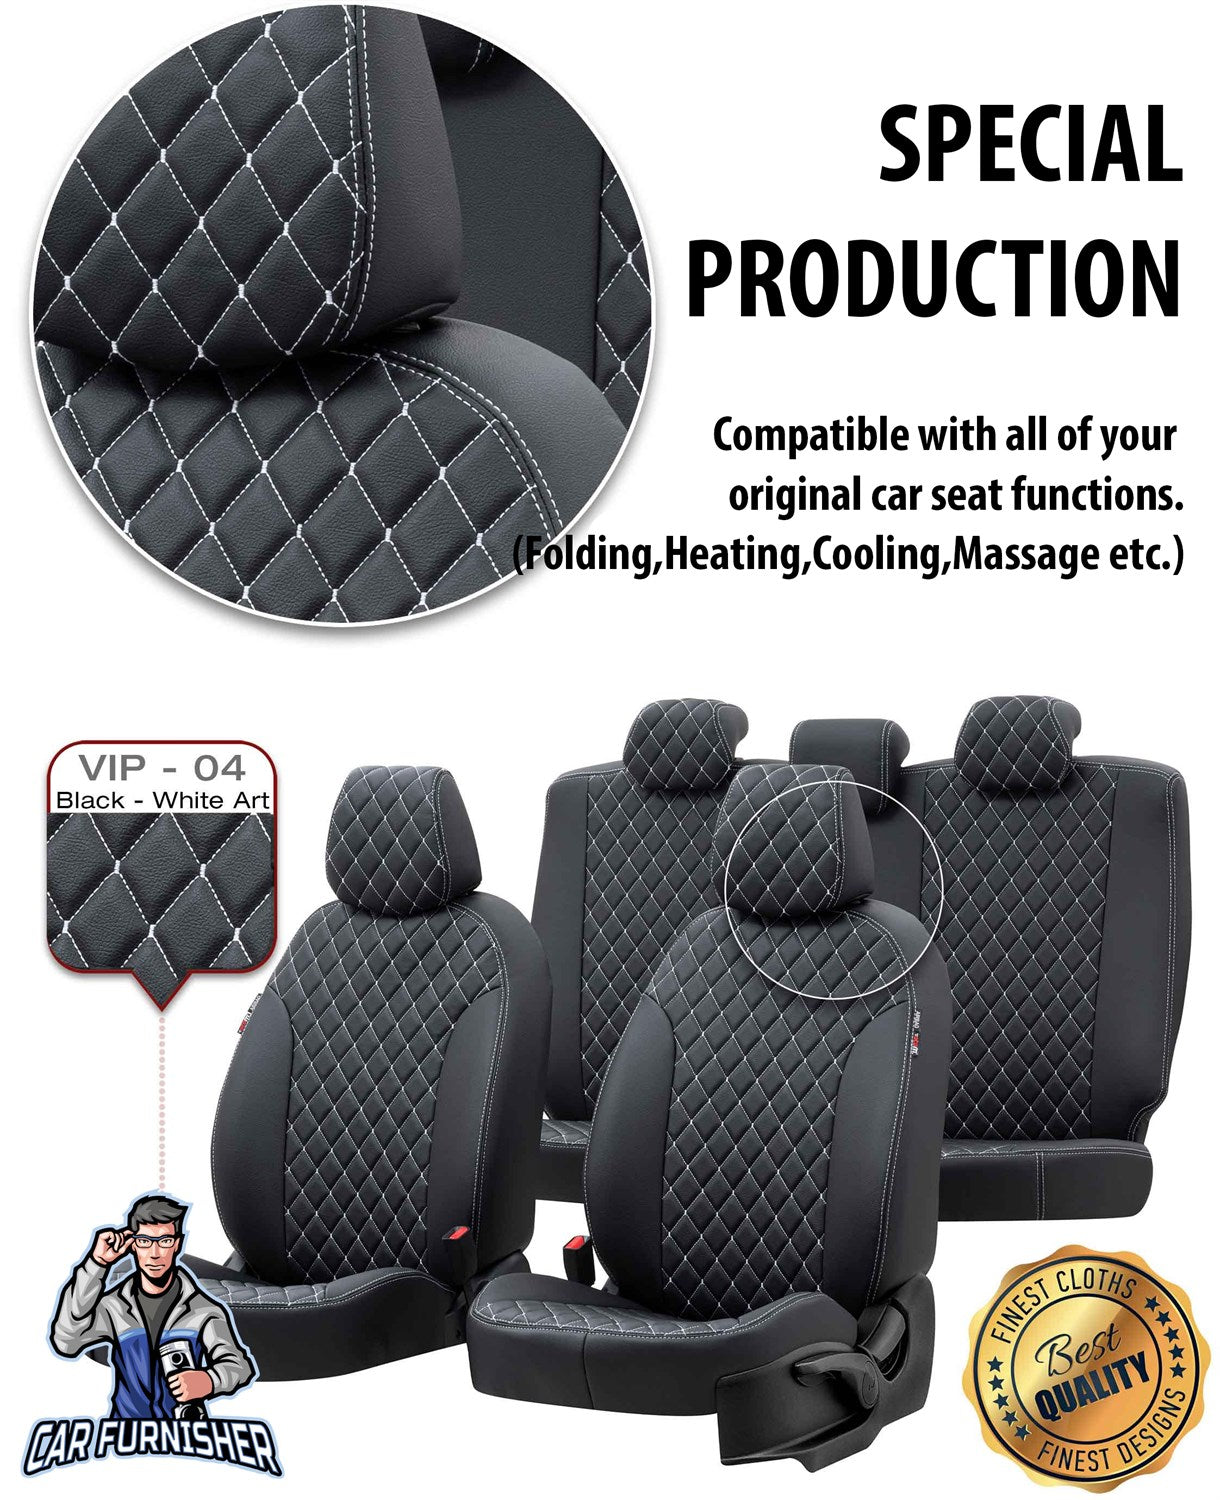 Skoda Roomster Car Seat Covers 2007-2014 Madrid Design Smoked Leather